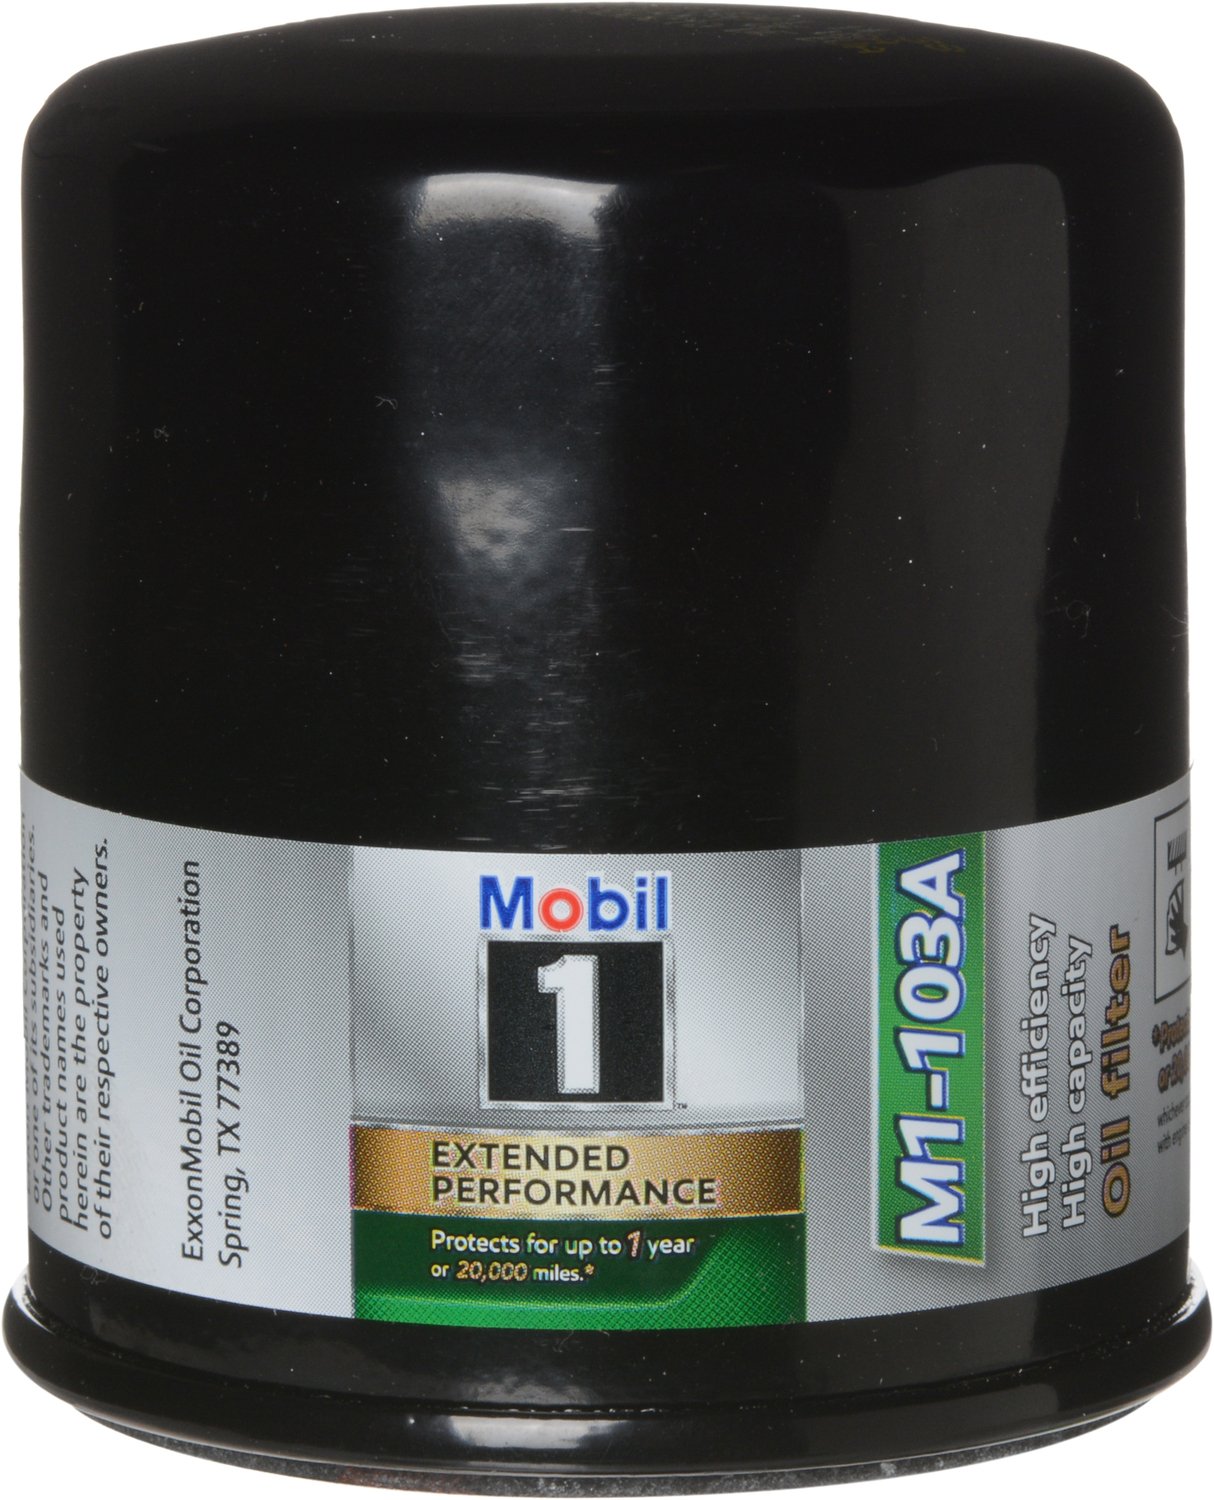 Mobil 1 Oil Filter, Canister, Screw-On, 13/16-16 in Thread, Steel, Black, Various GM Applications, Each  - Like New